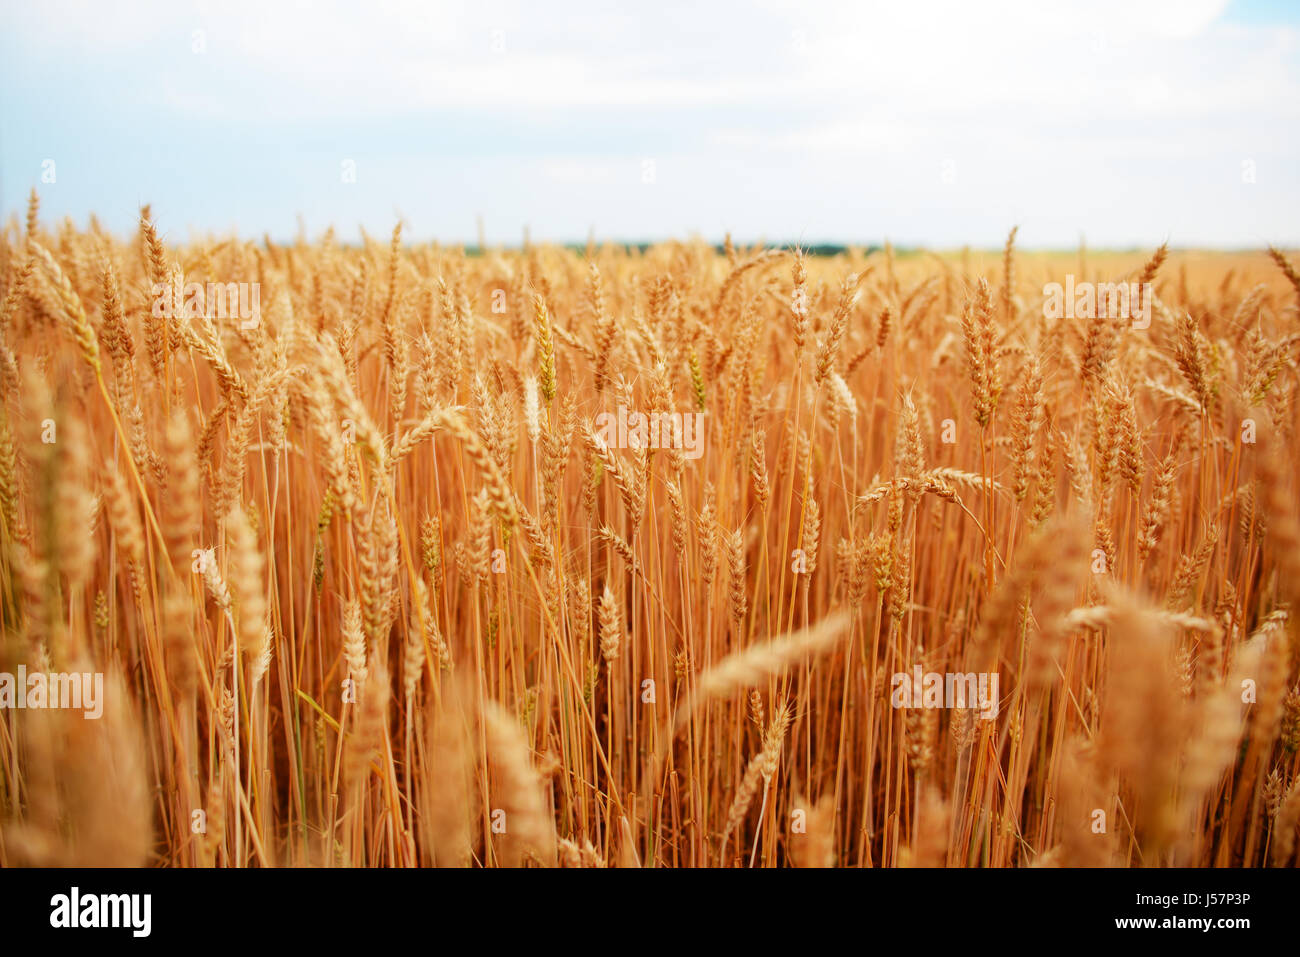 Wheat field. Ears of golden wheat close up. Stock Photo